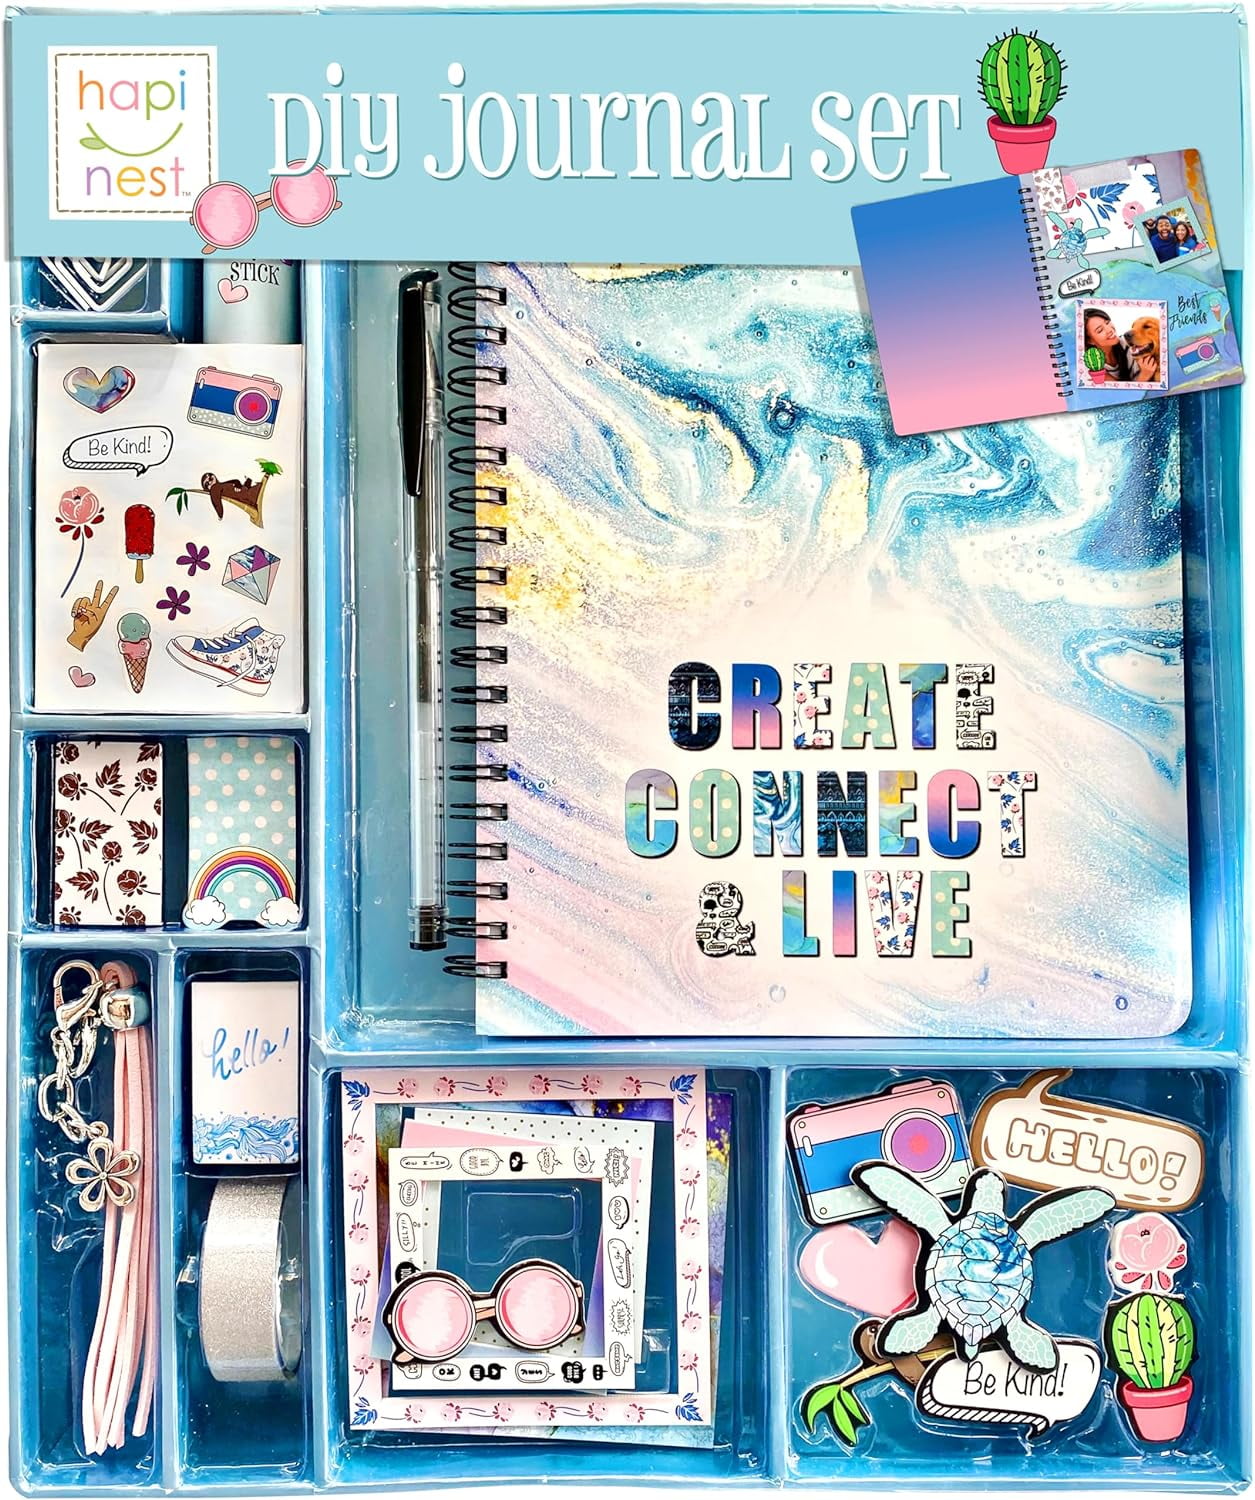 Hapinest DIY Journal Set for Girls Gifts Ages Years Old and Up